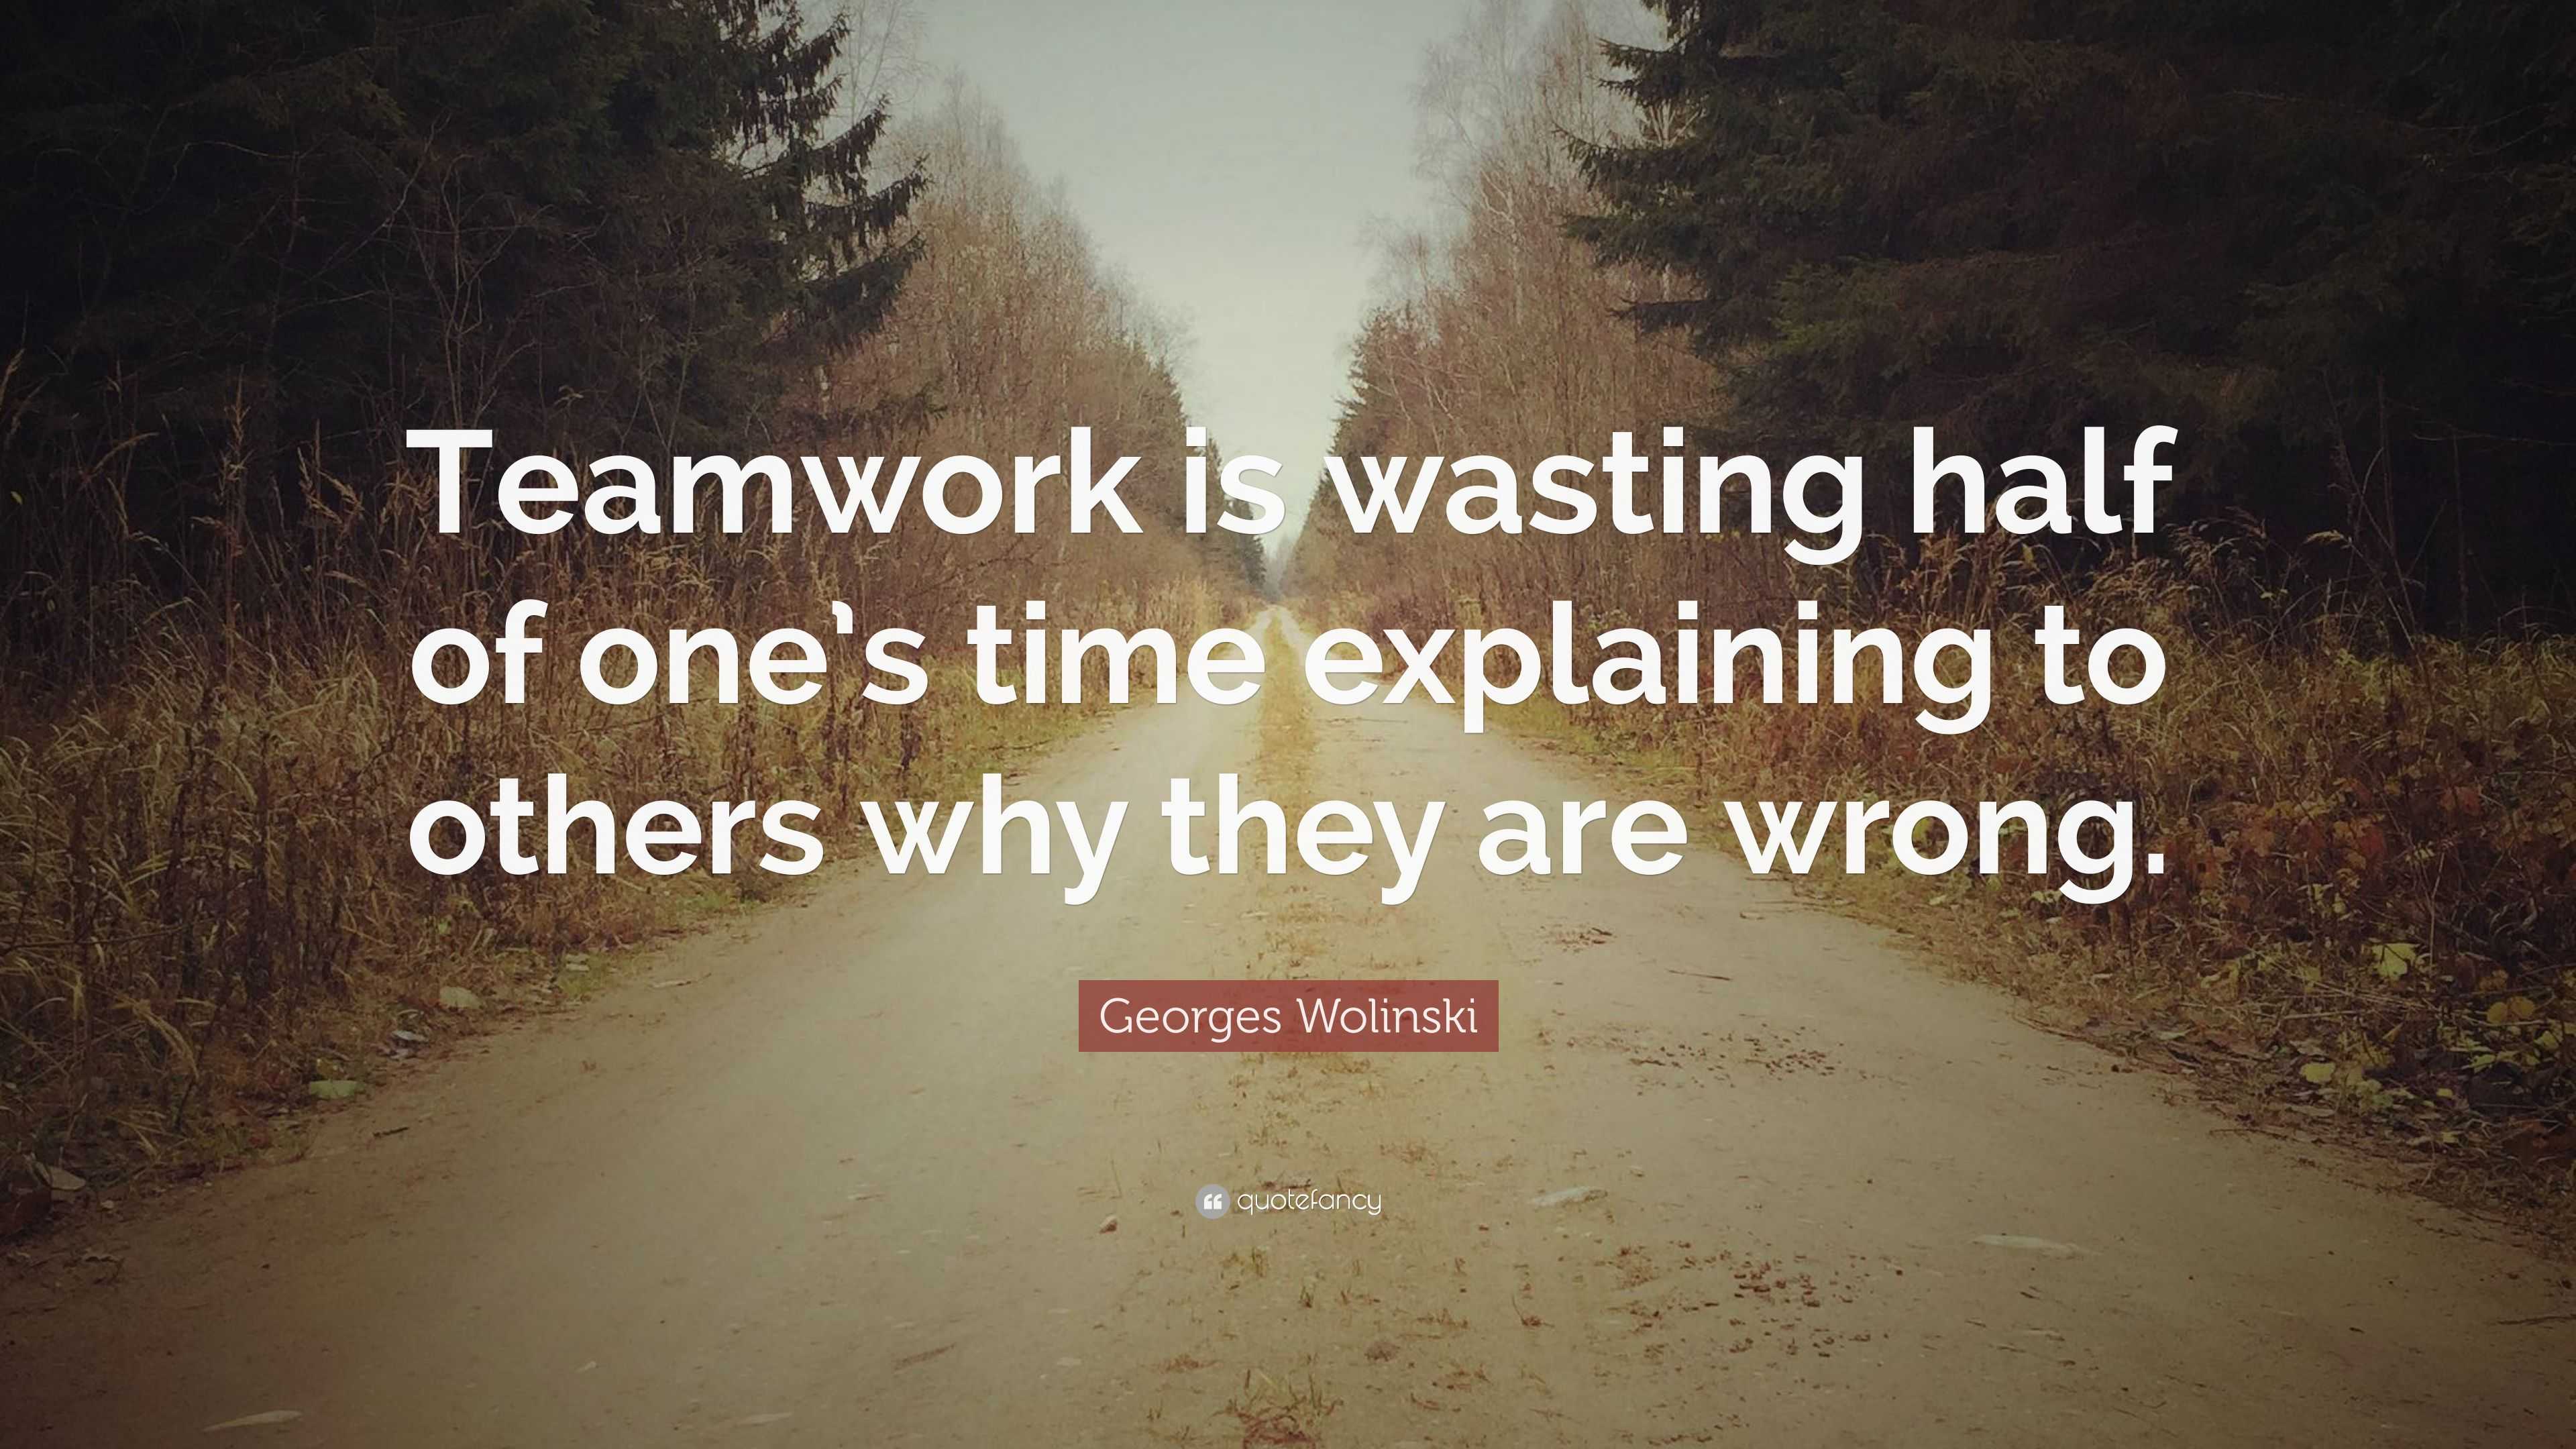 Georges Wolinski Quote: “Teamwork is wasting half of one’s time ...